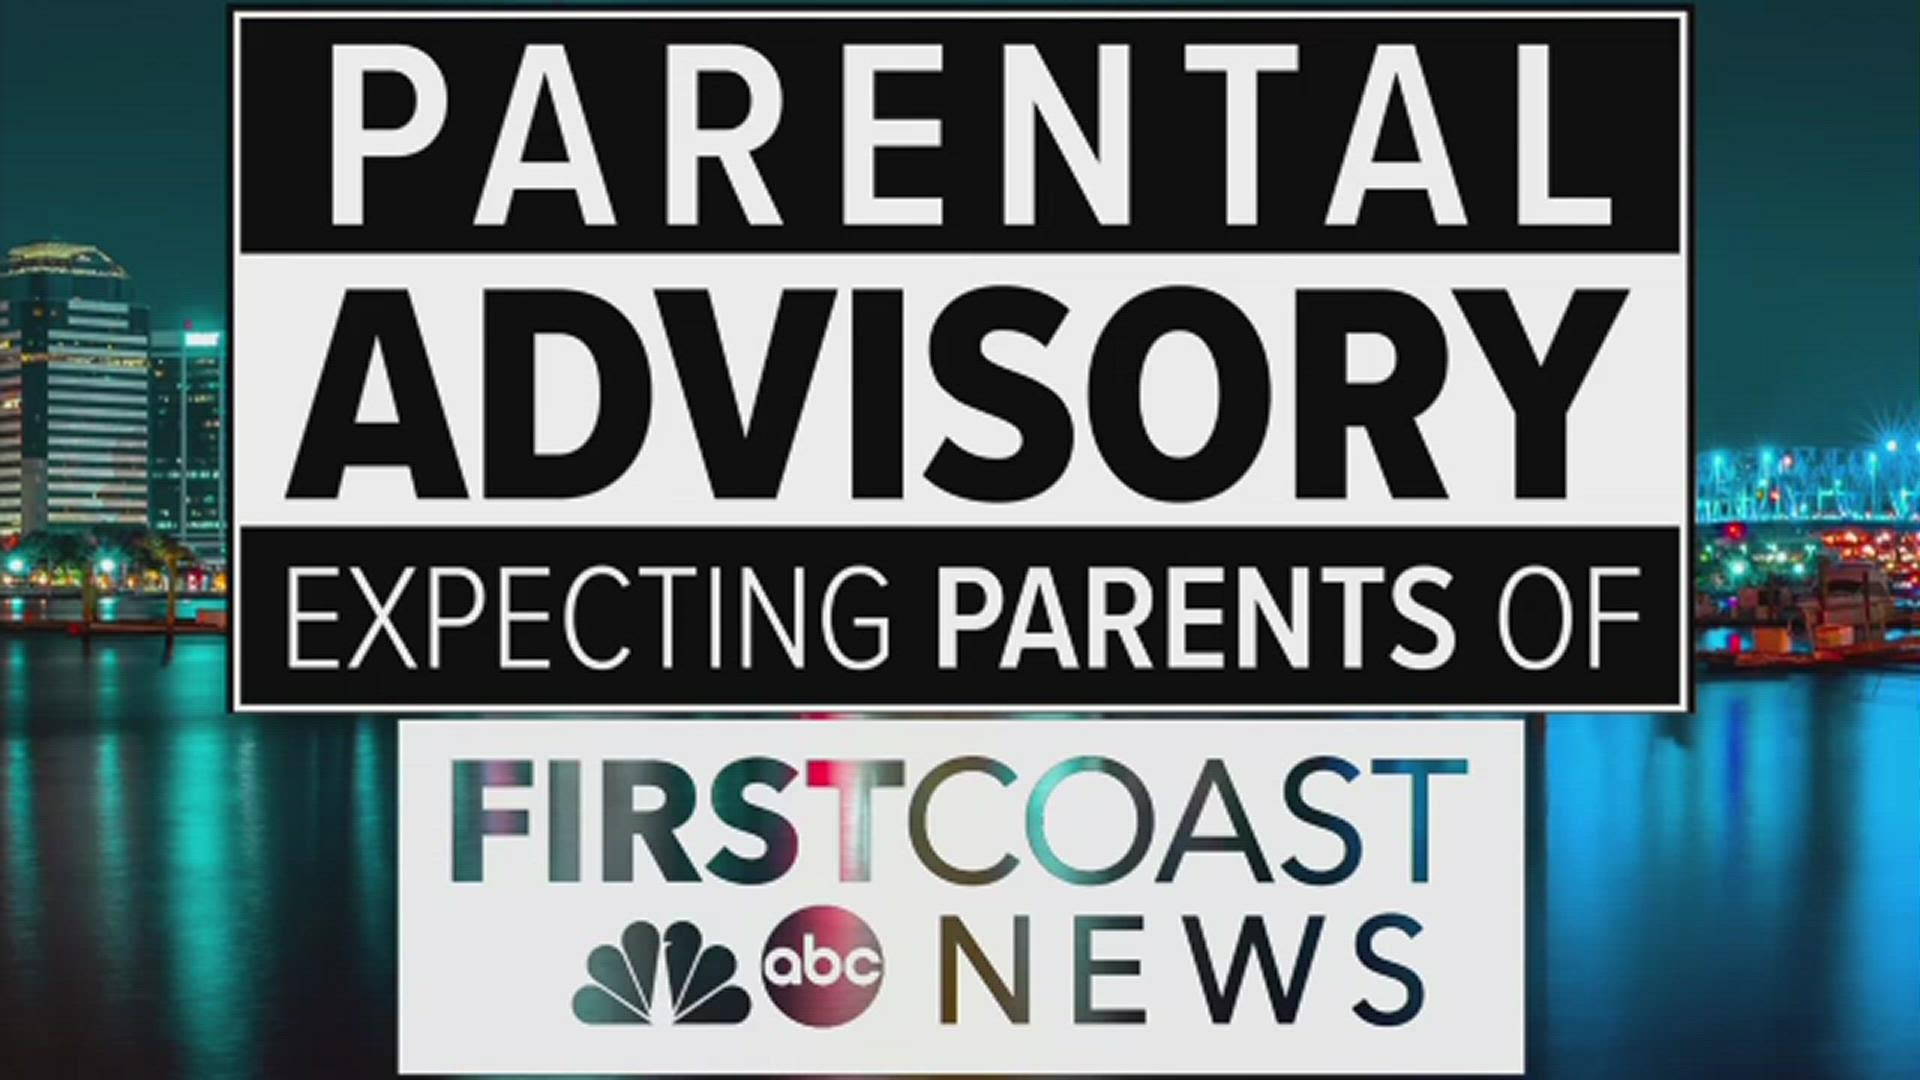 It's been a long busy stretch apart, but the expecting parents of First Coast News are together again! Socially distanced and through Zoom of course.